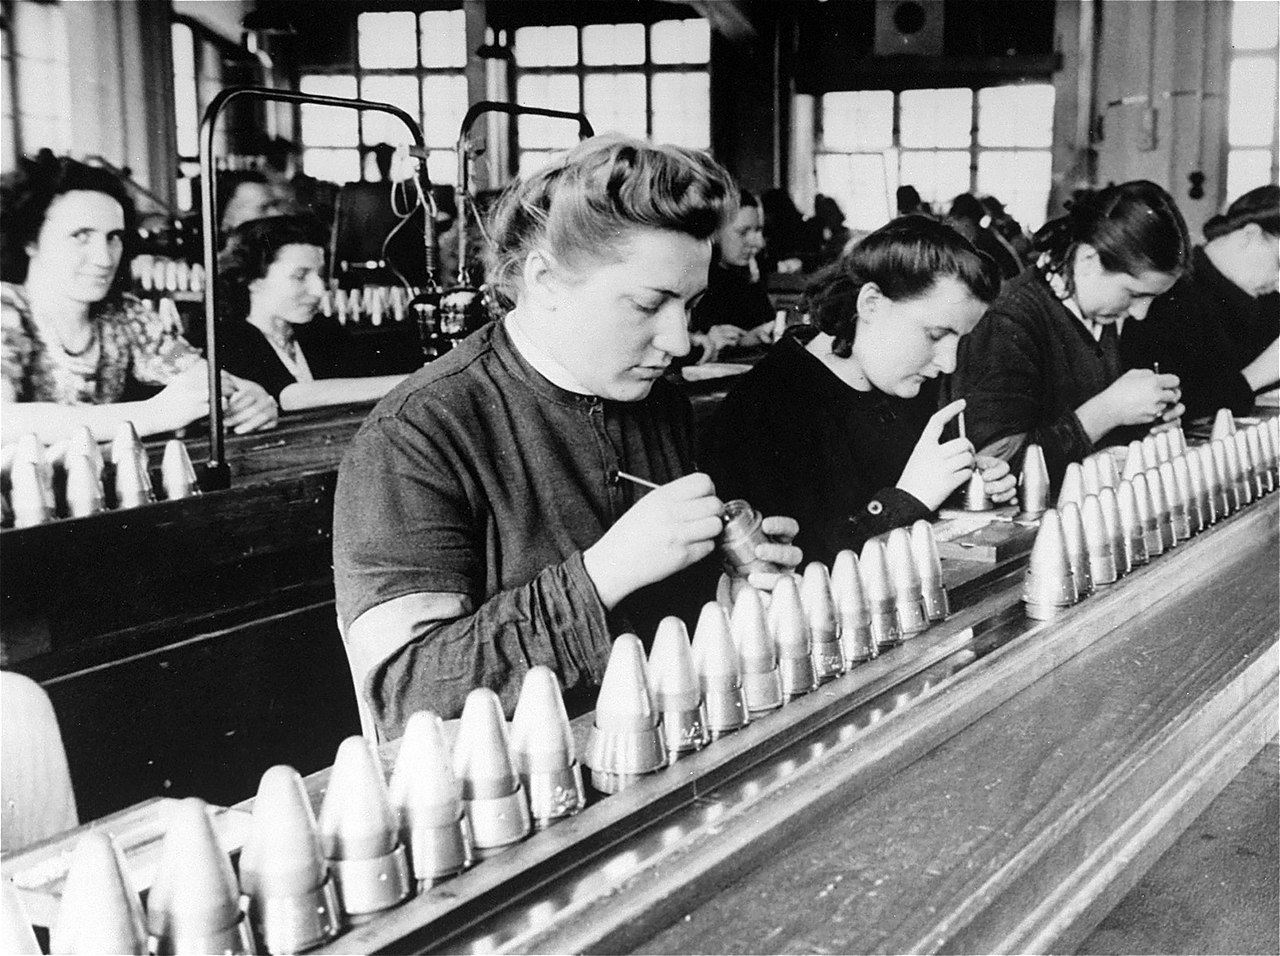 1280x956px-Female_foreign_workers_from_Stadelheim_prison_work_in_a_factory_owned_by_the_AGFA_camera_company-vWA24